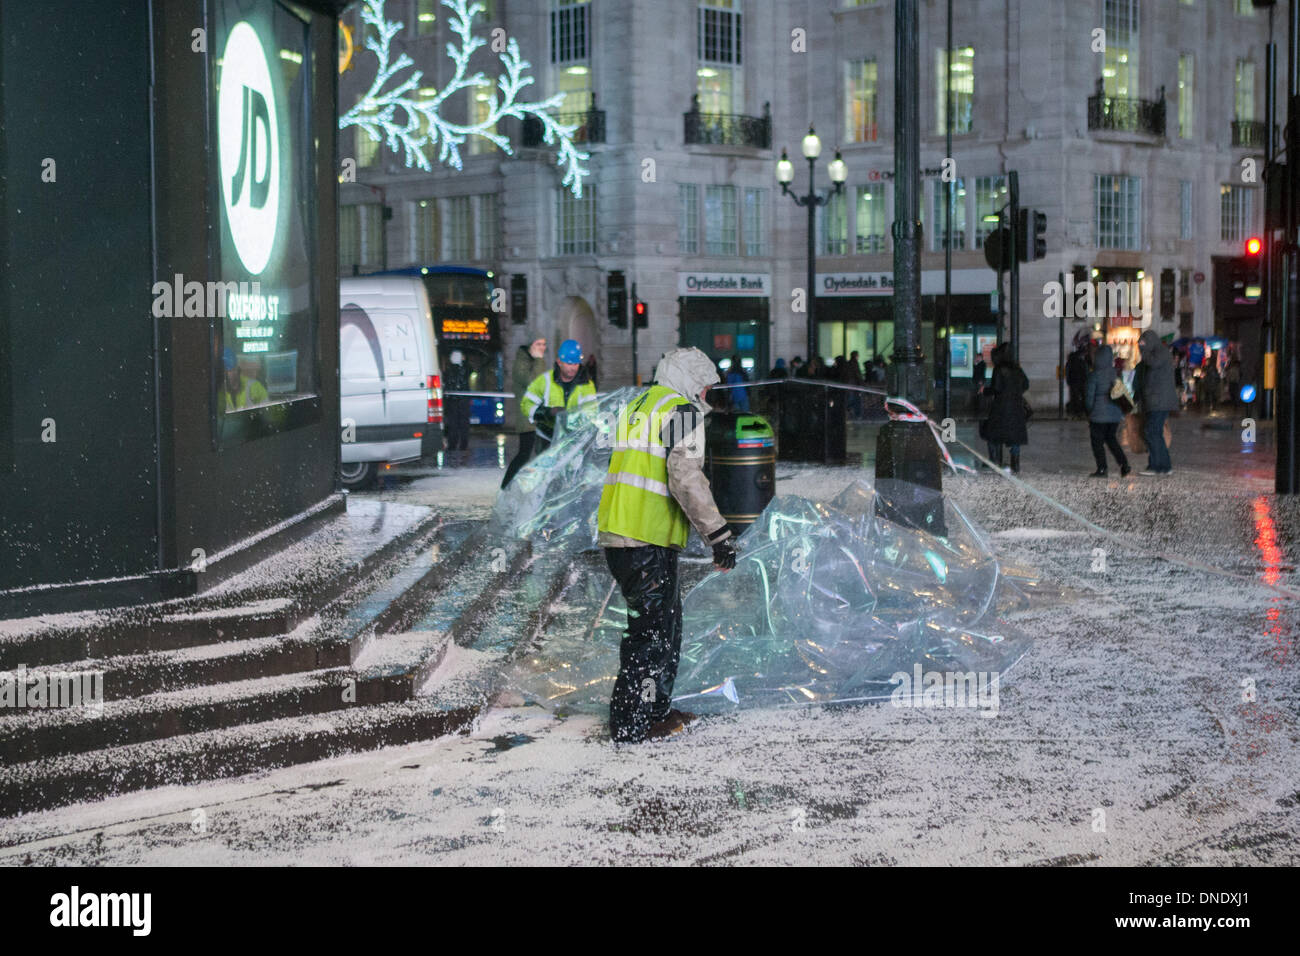 London, UK. 23rd Dec, 2013. Giant snow globe around Eros in Piccadilly Circus in London deflates because of the high winds. The stormy weather has caused disruption across the UK. Credit:  martyn wheatley/Alamy Live News Stock Photo